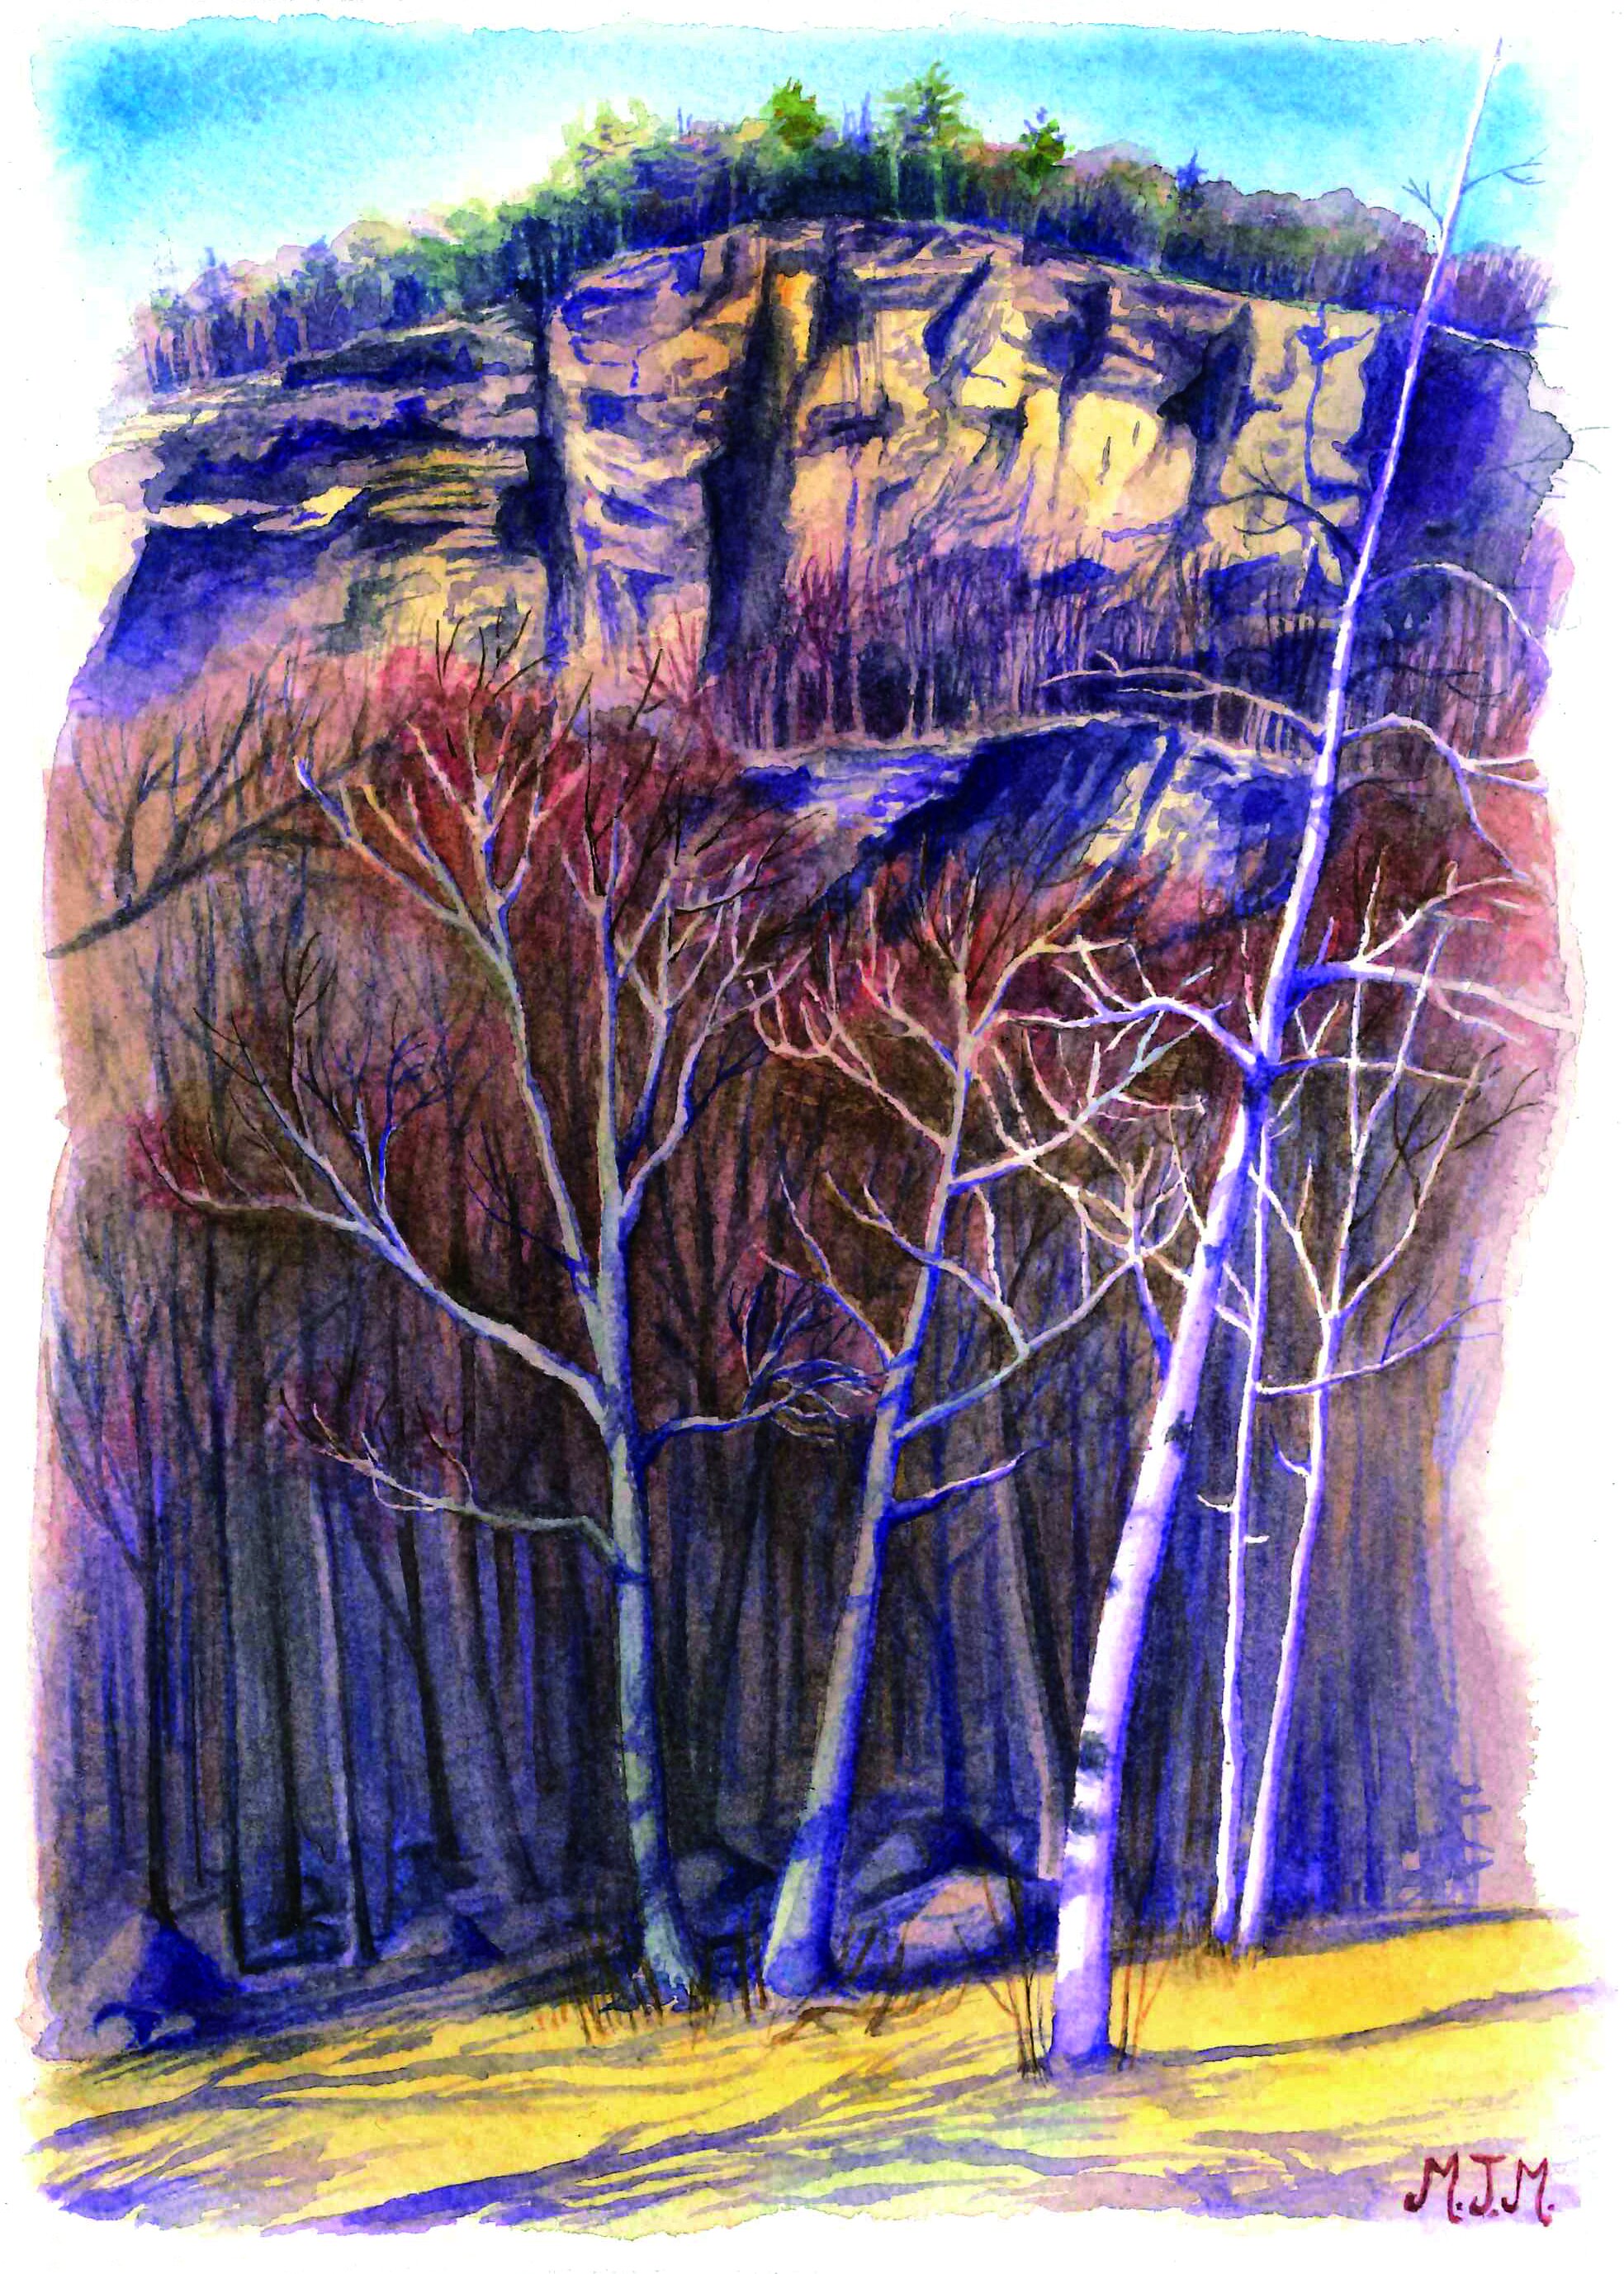 Late Afternoon April Light at Shell Pond, Watercolor